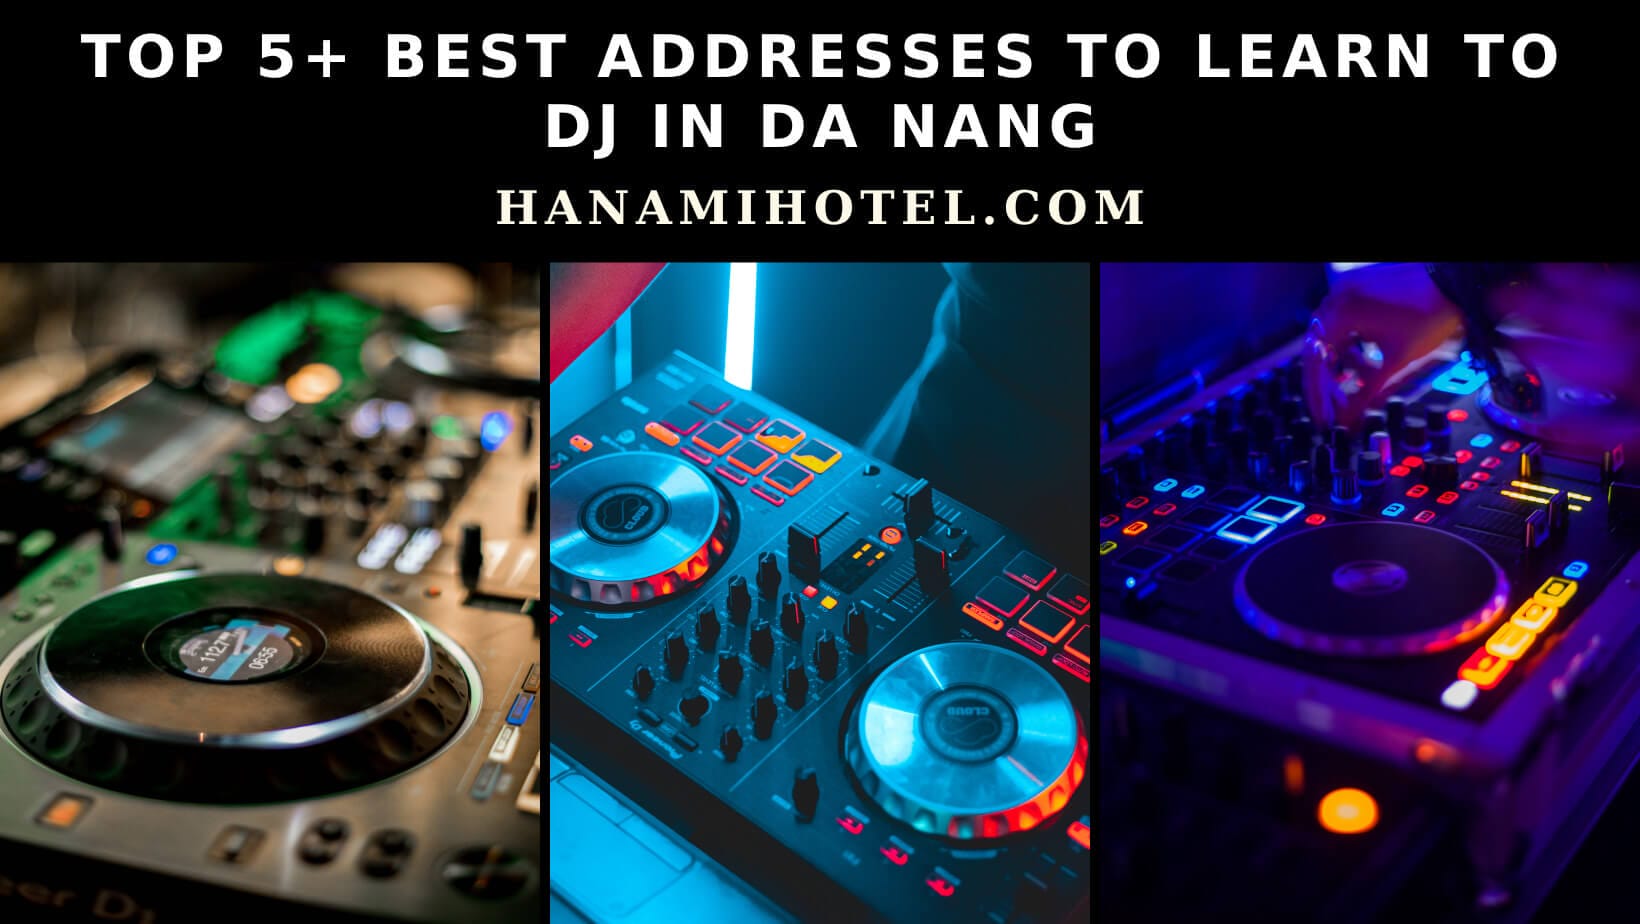 best addresses to learn to DJ in da nang